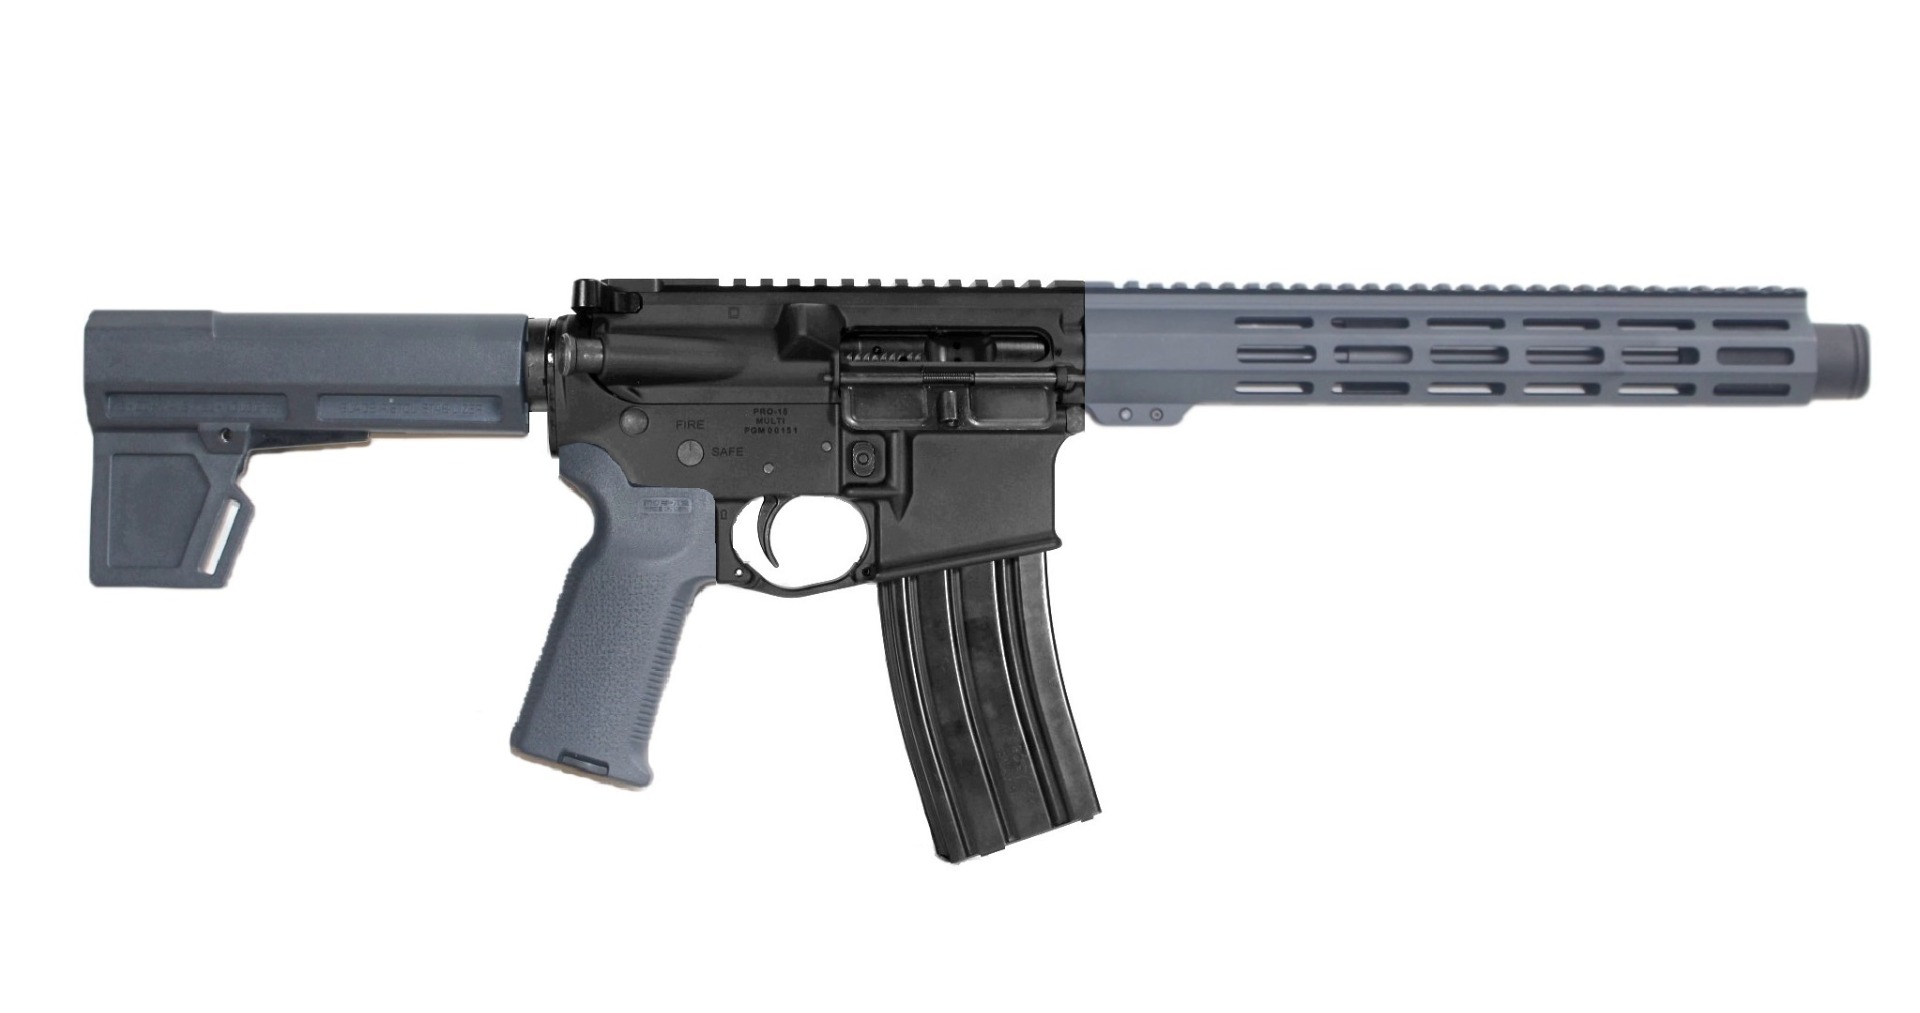 P2A PATRIOT 10.5" 300 Blackout 1/8 or 1/5 Pistol Length Melonite M-LOK Pistol with Flash Can - BLK/GRAY